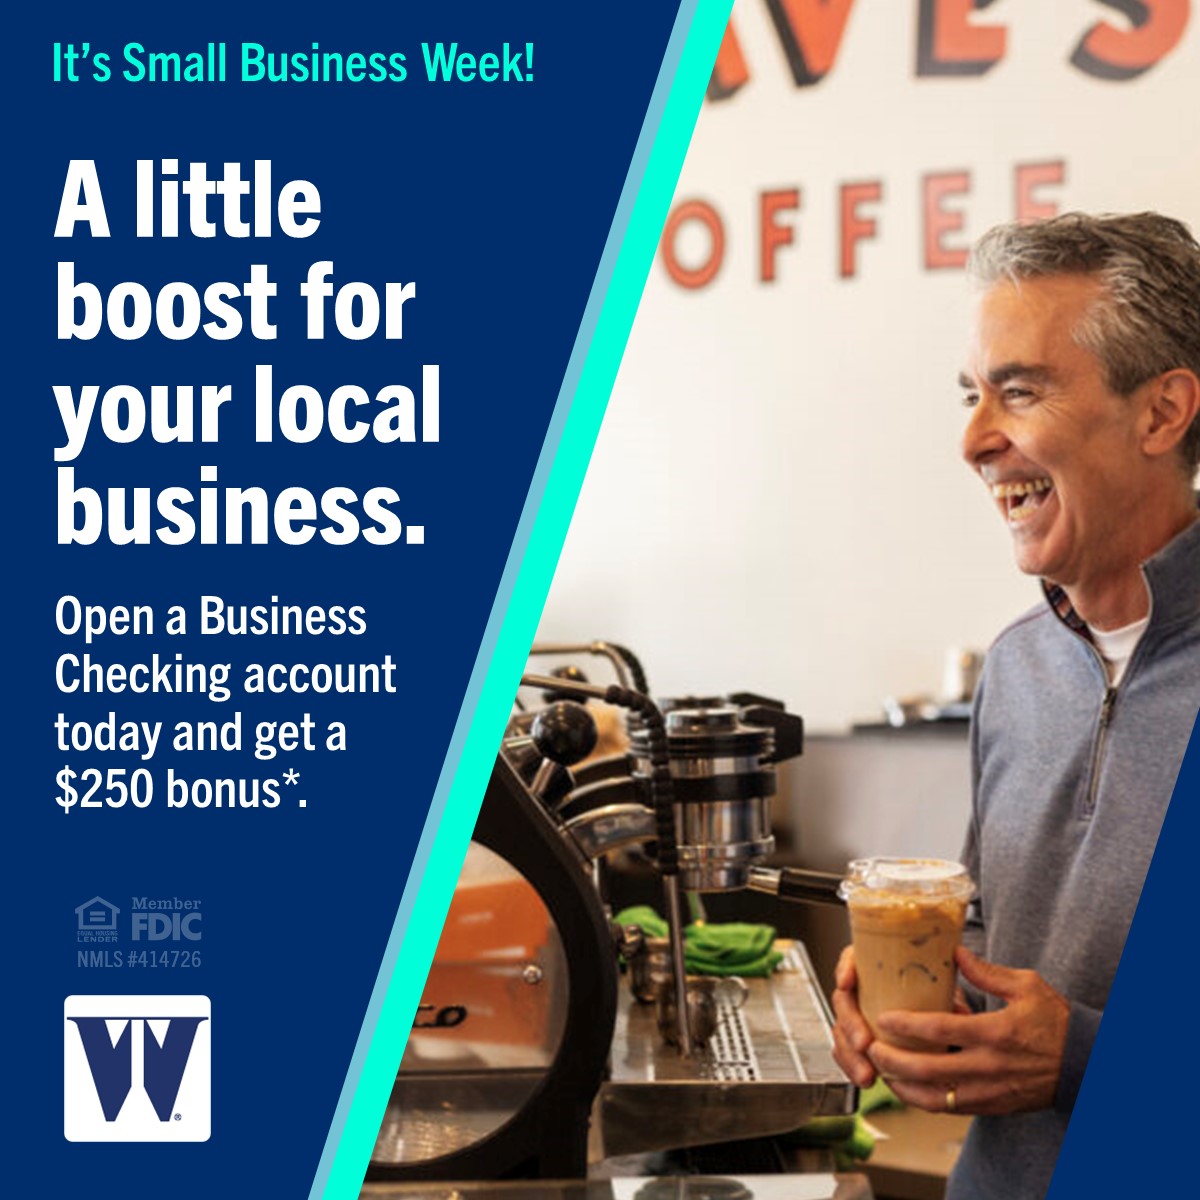 Let us help your business grow with access to convenient digital tools and branches statewide. Best of all, there’s always a person to answer your questions, so you get decisions fast, because they’re made locally: ▶️ ow.ly/VHfy50RtXHO _ What we value is you.™ #WashTrust